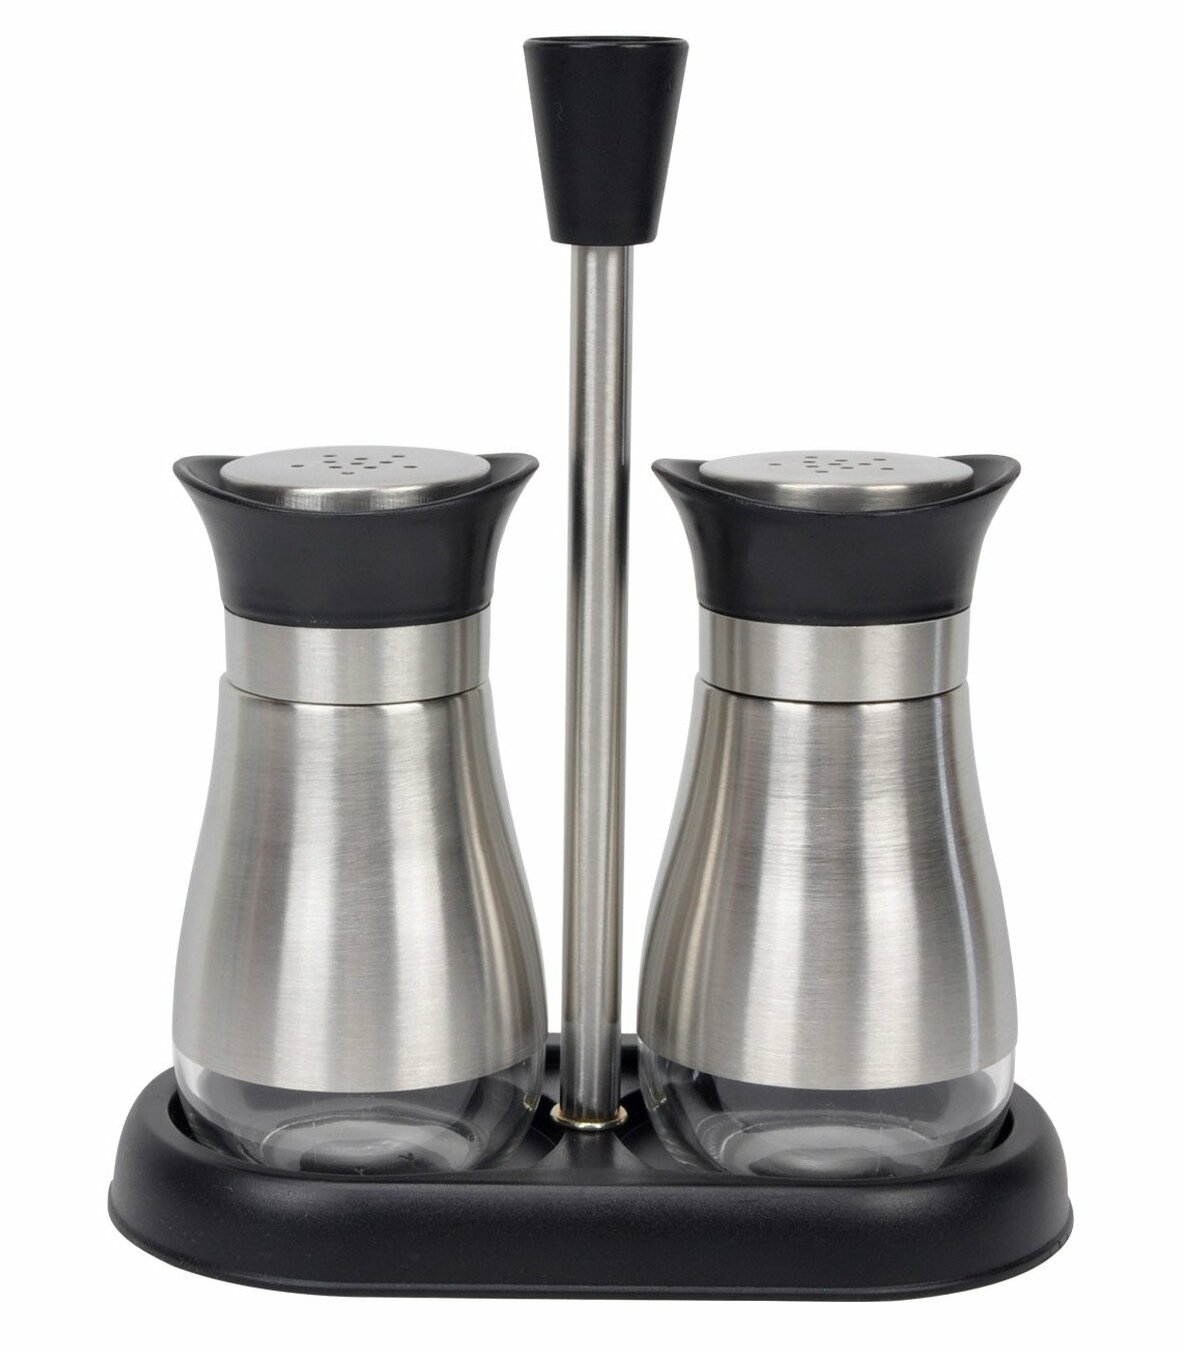 Evelyne GMT-10025 Stainless Steel Salt and Pepper Shakers Set for Home Kitchen and Dinning Table 